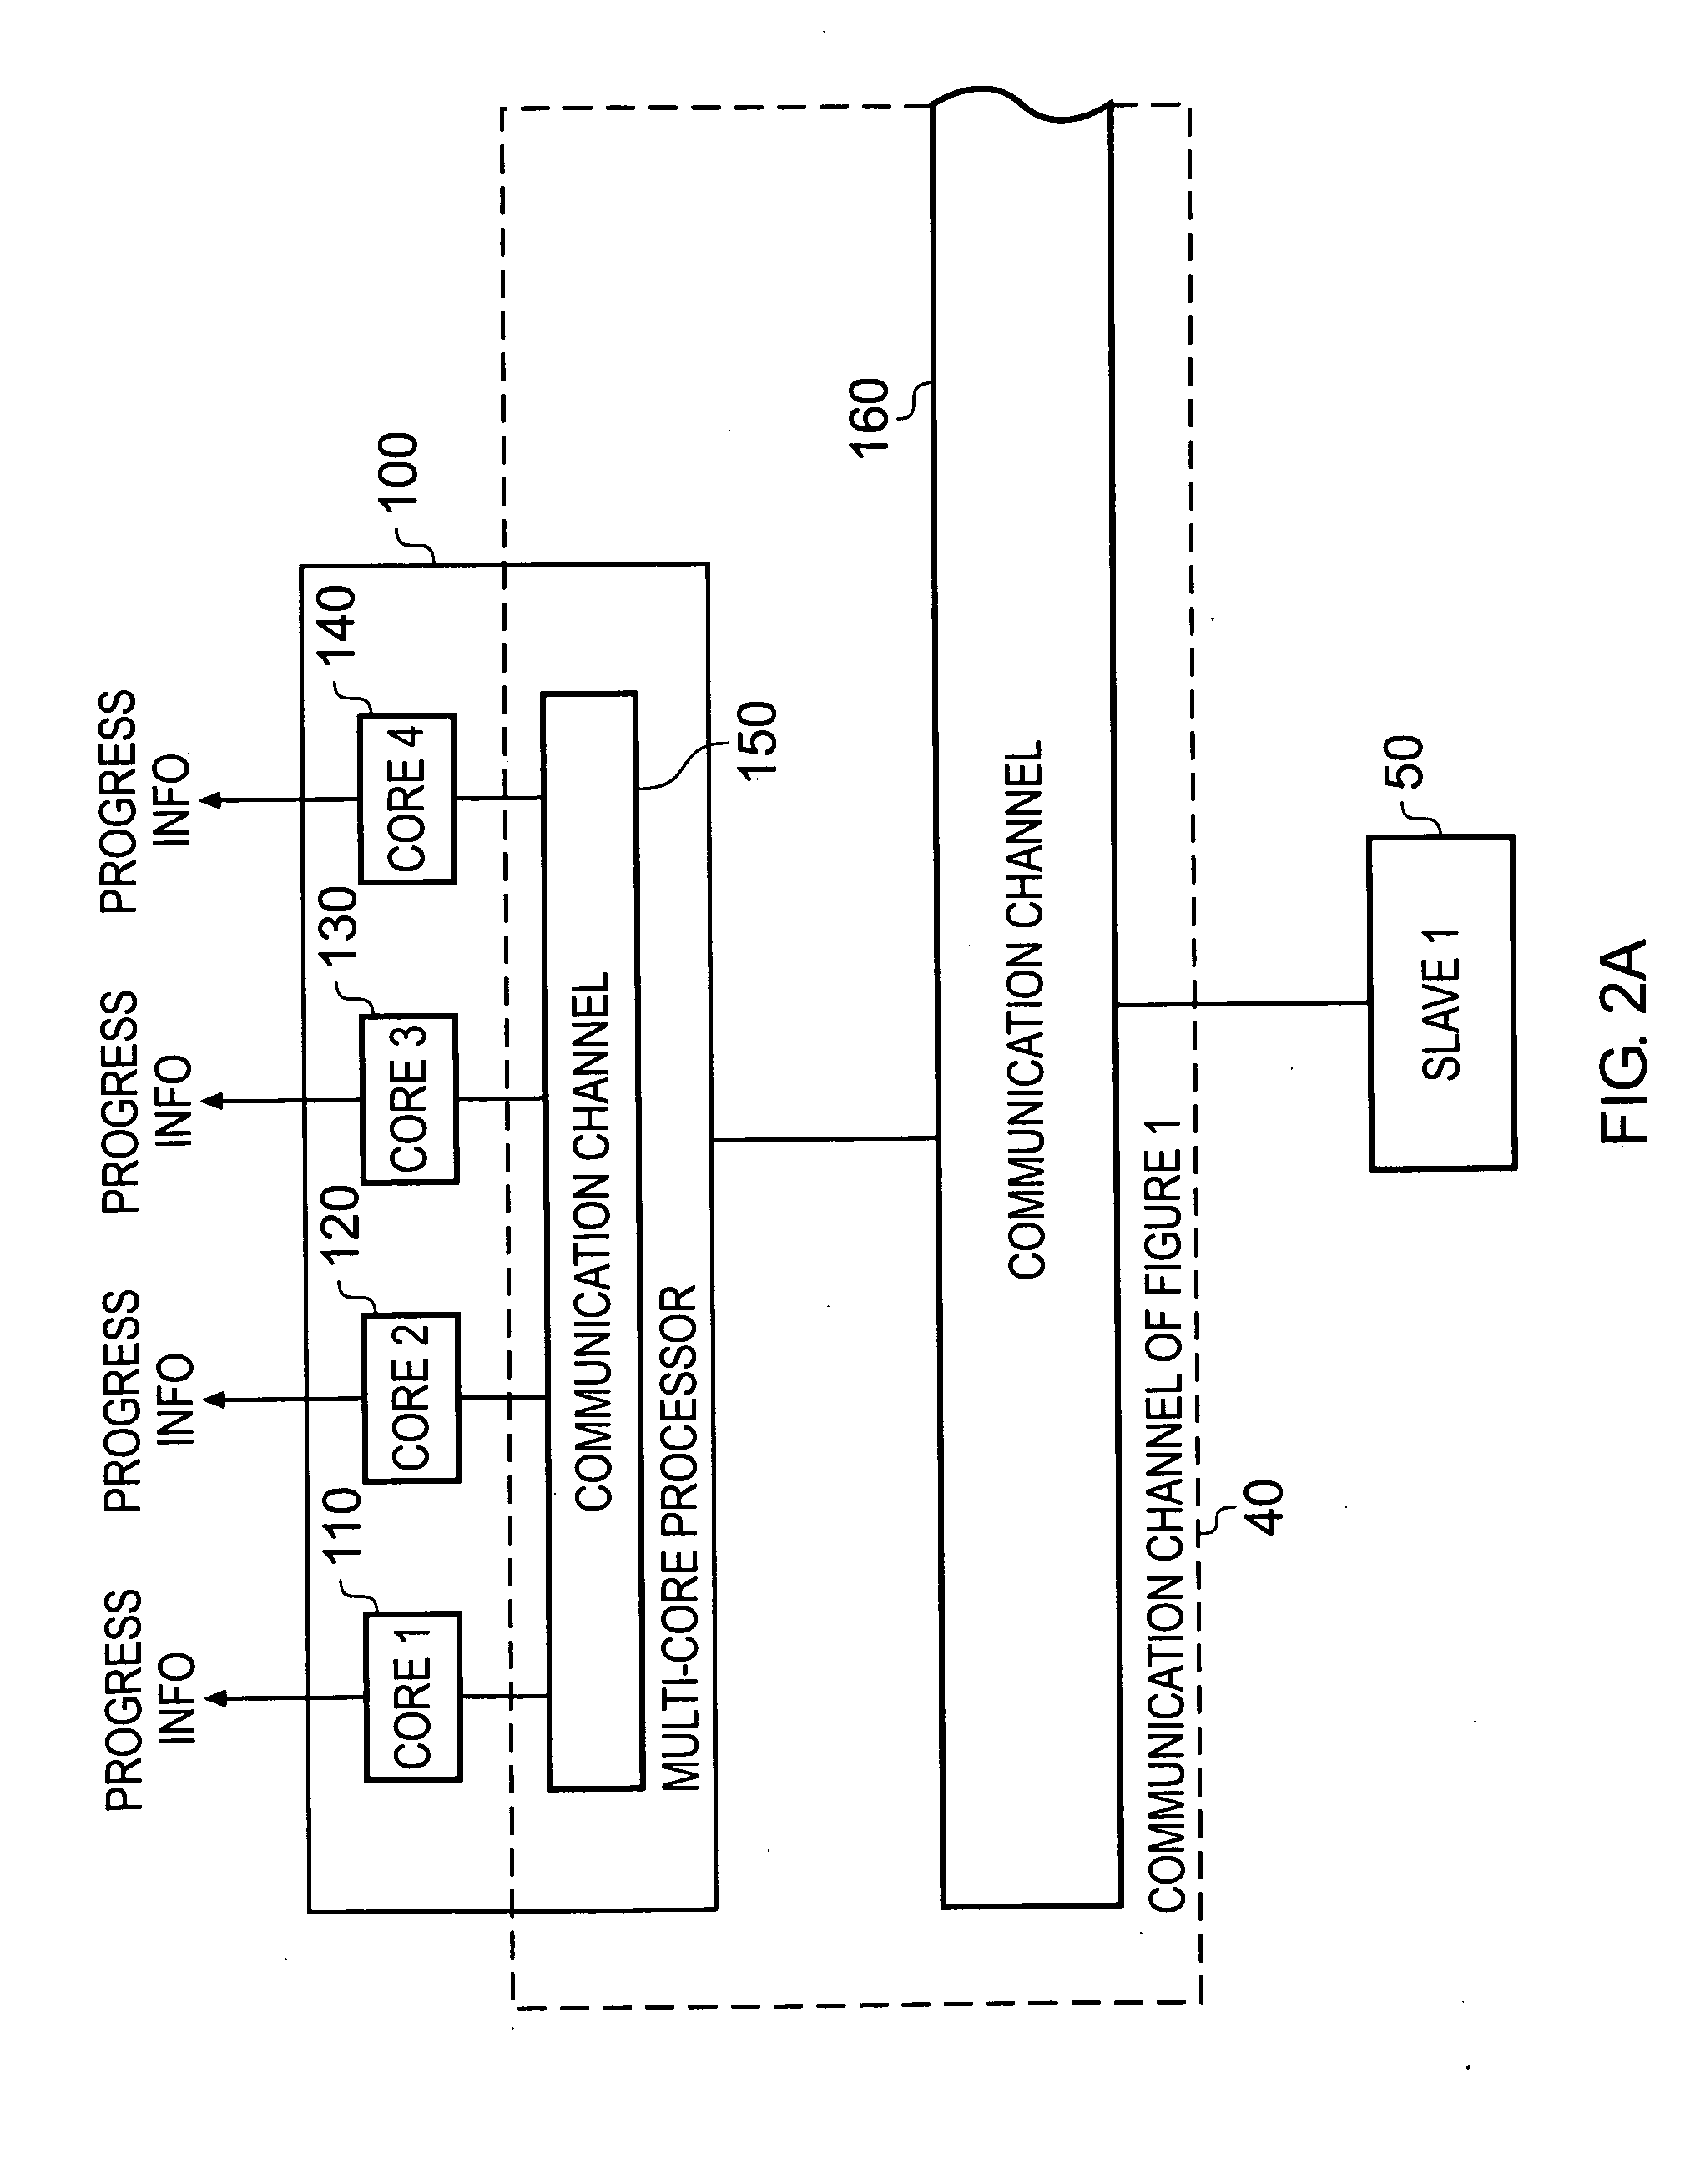 Data processing apparatus and method for arbitrating between messages routed over a communication channel